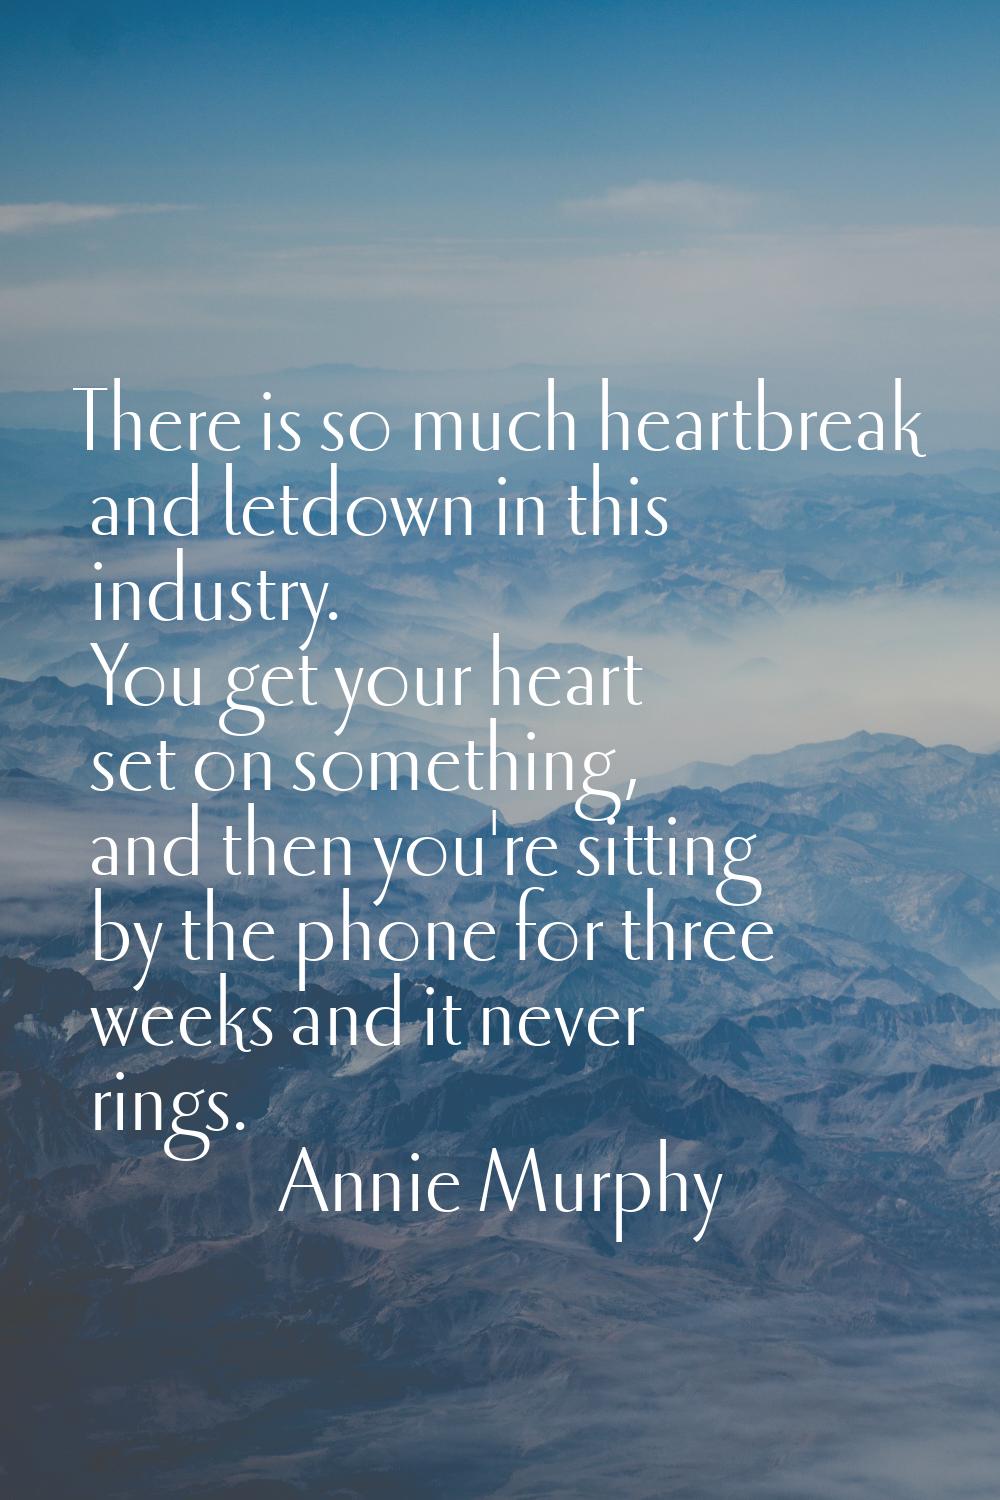 There is so much heartbreak and letdown in this industry. You get your heart set on something, and 